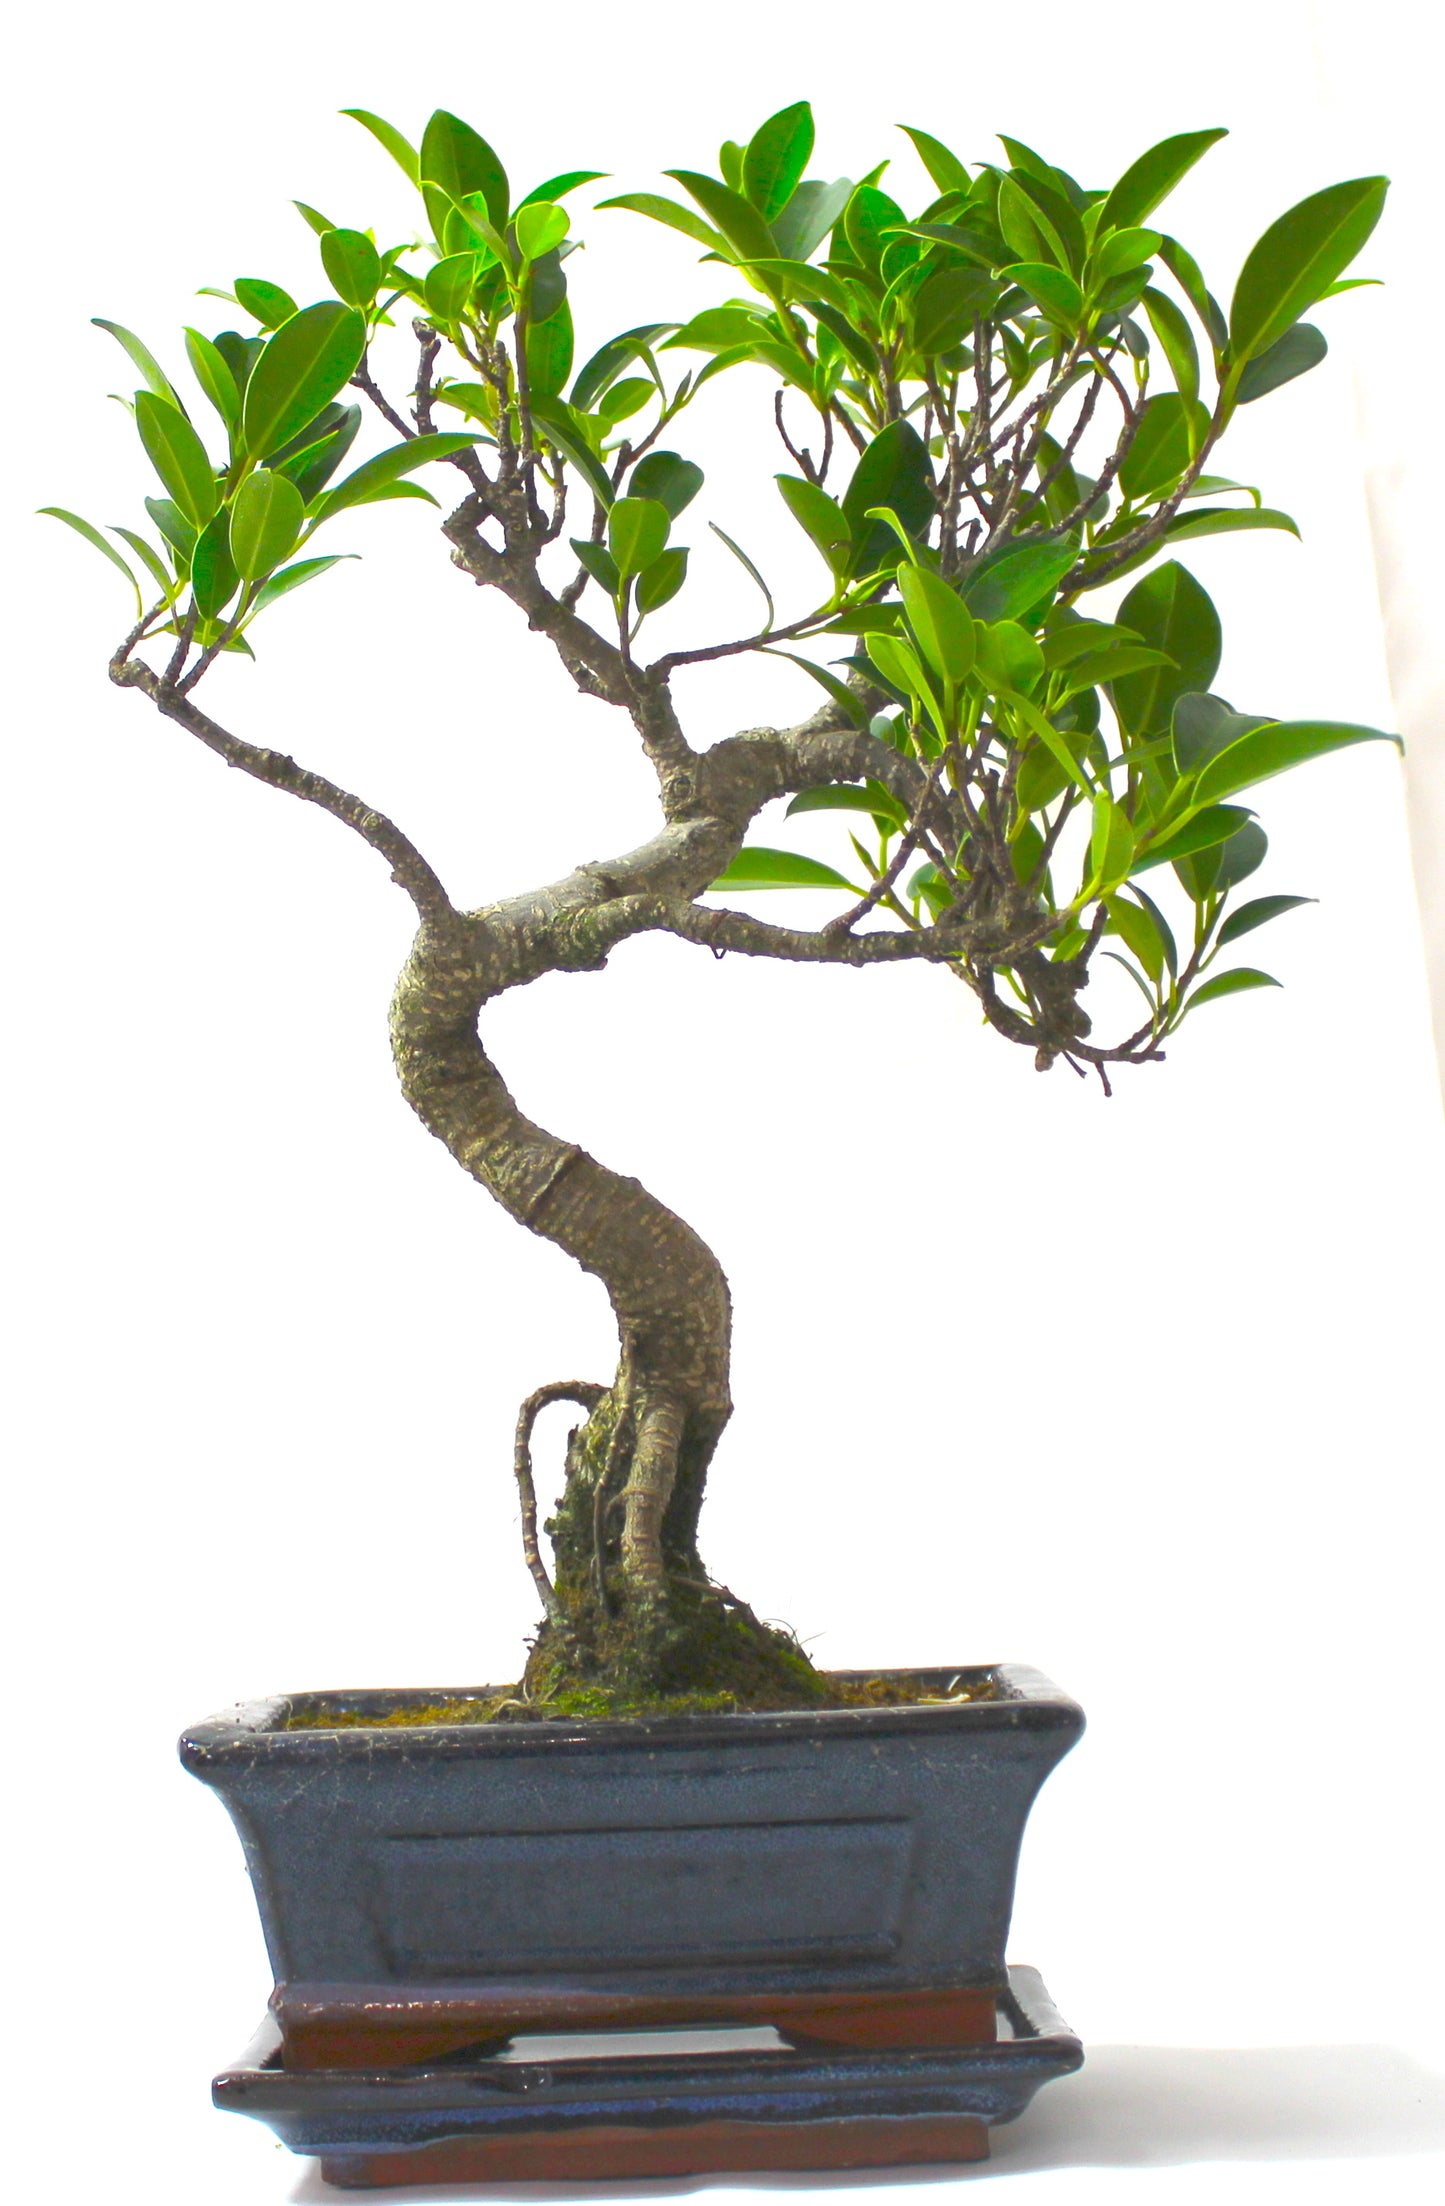 Ficus Retusa (Fig) Bonsai Tree S trunk - supplied with Care set and drip tray